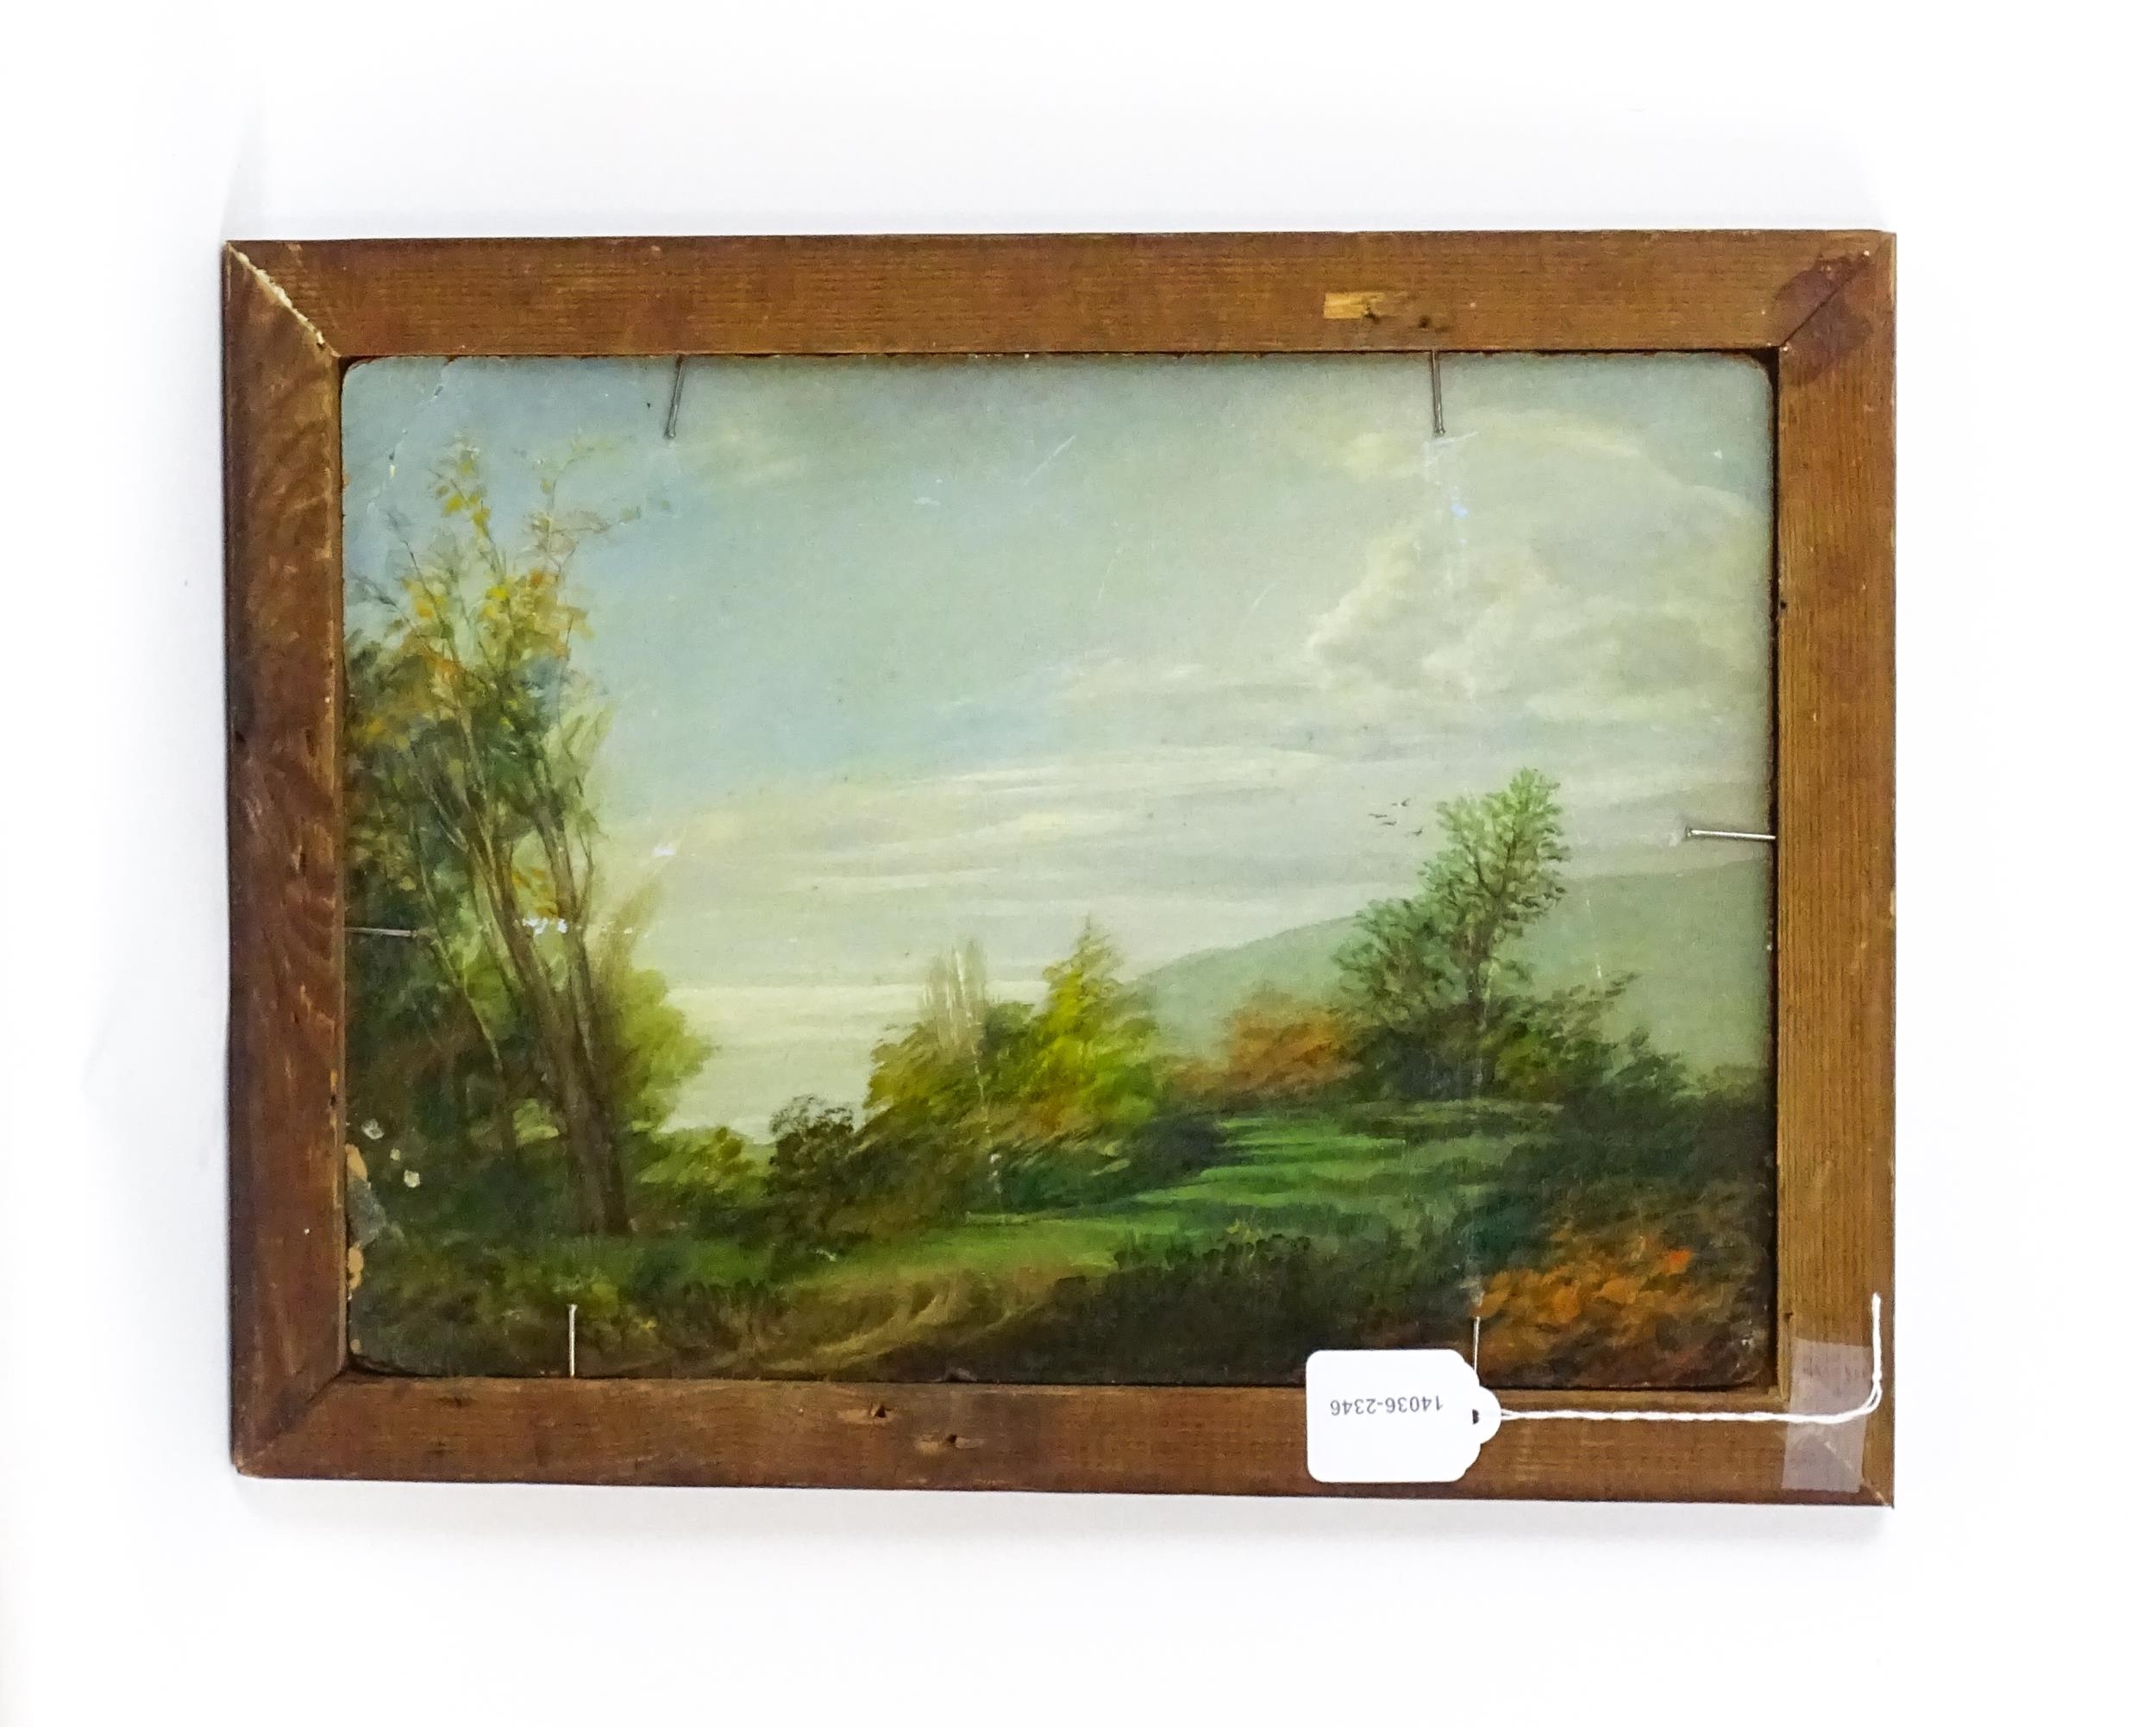 Manner of John Mace, Early 20th century, Oil on board, A wooded landscape with a stream in the - Image 2 of 3